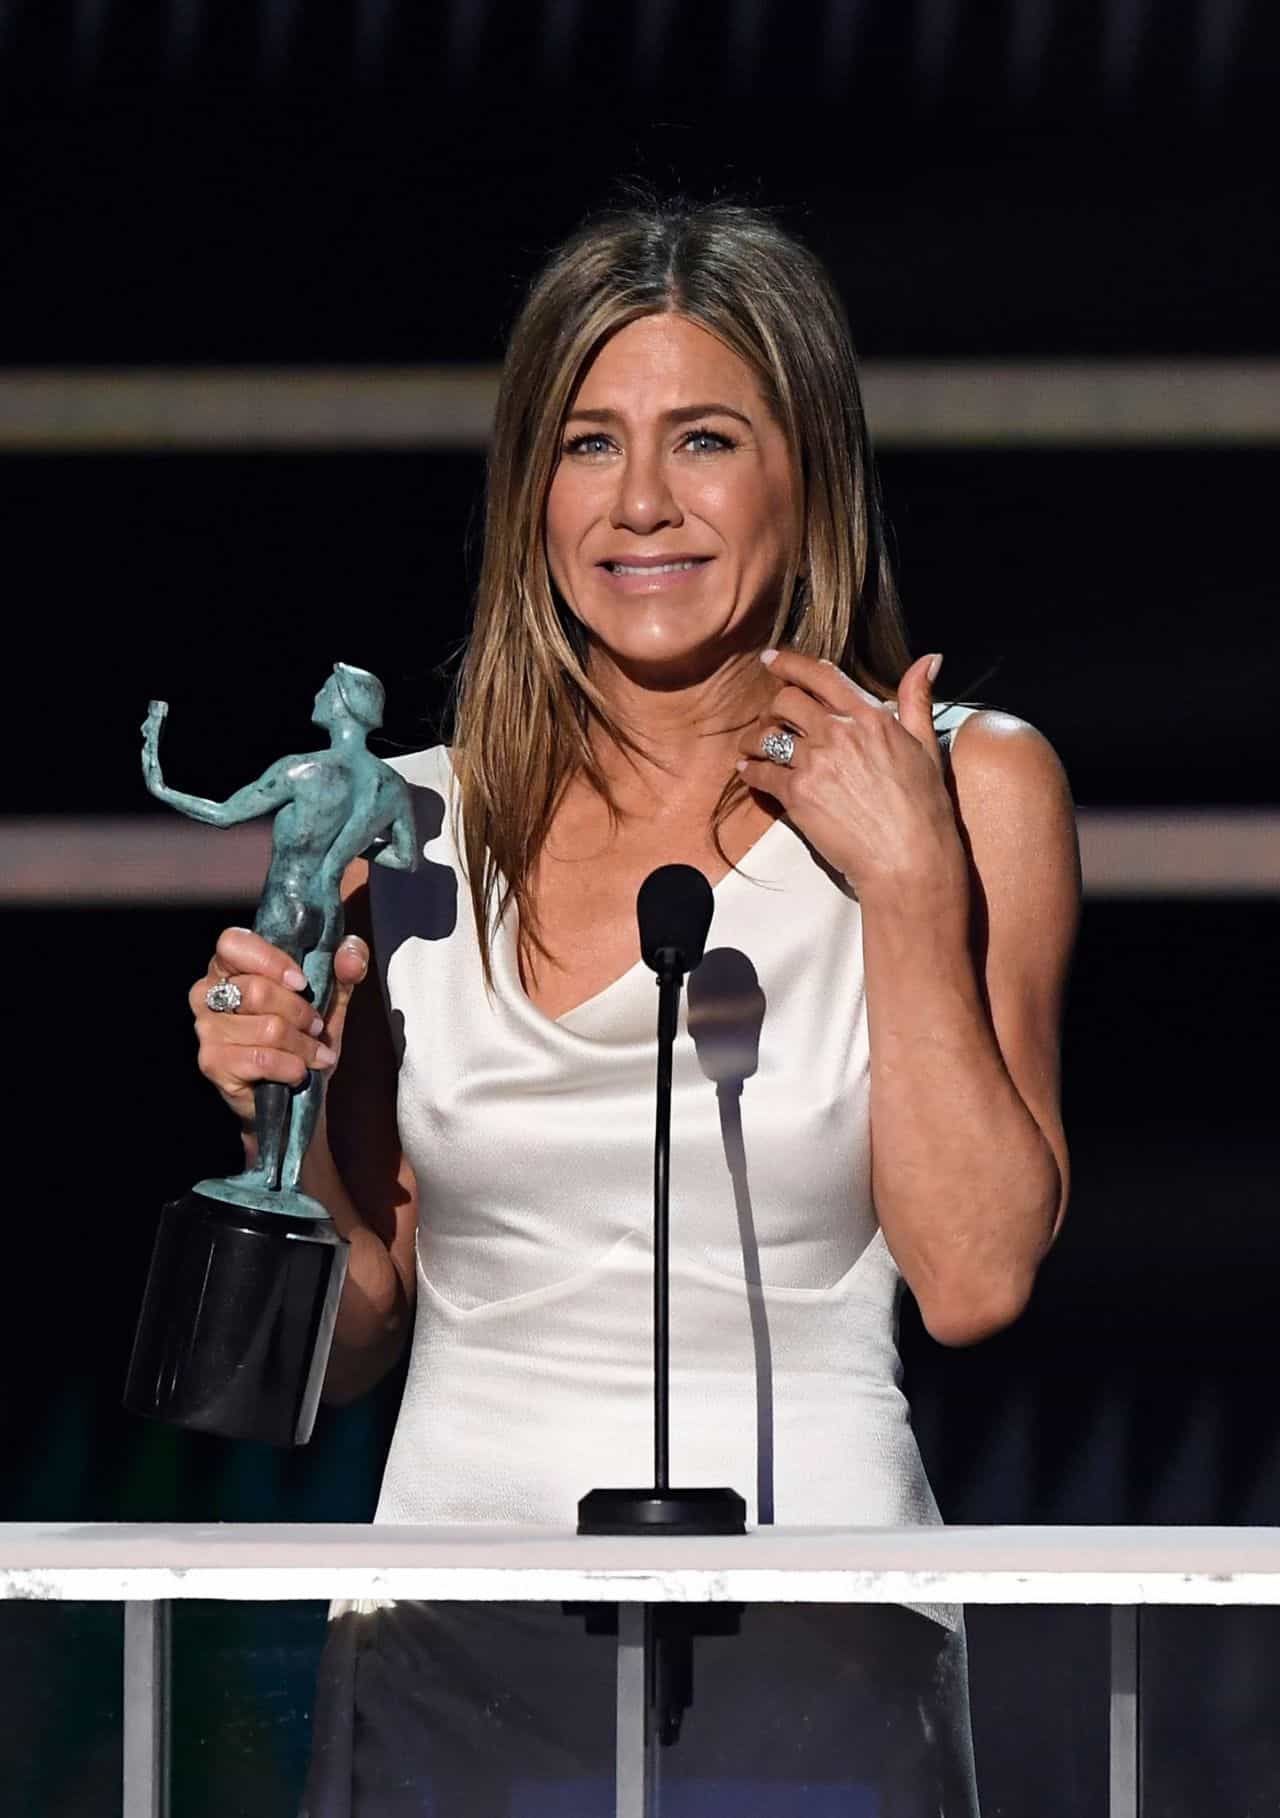 Jennifer Aniston Gleams in a White Dress at the 26th Annual SAG Awards